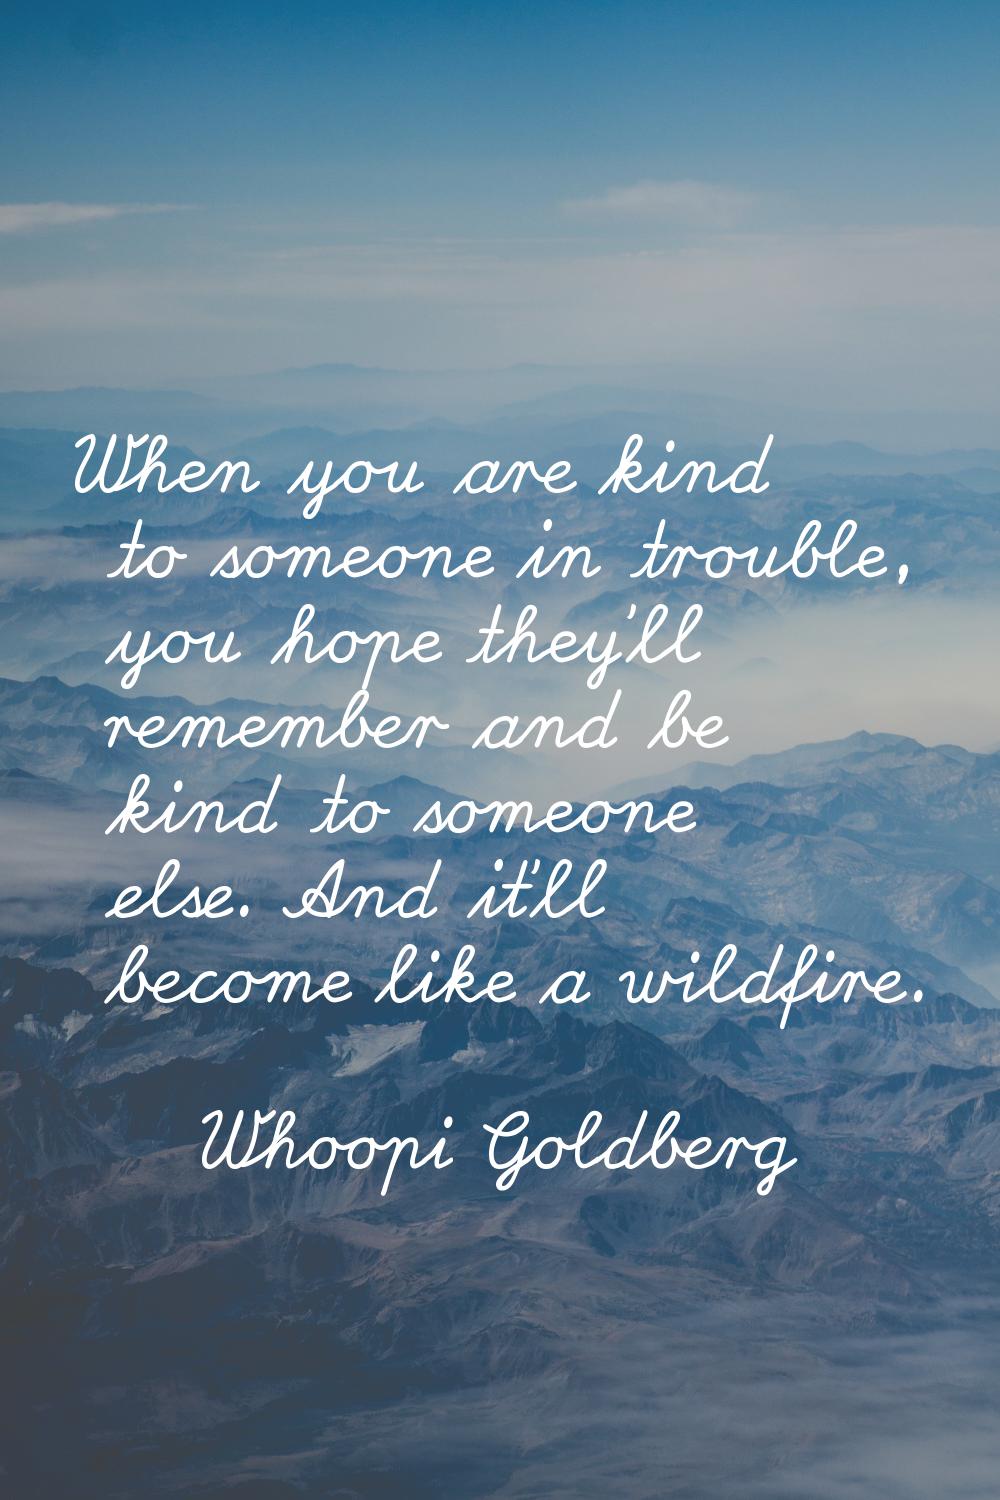 When you are kind to someone in trouble, you hope they'll remember and be kind to someone else. And